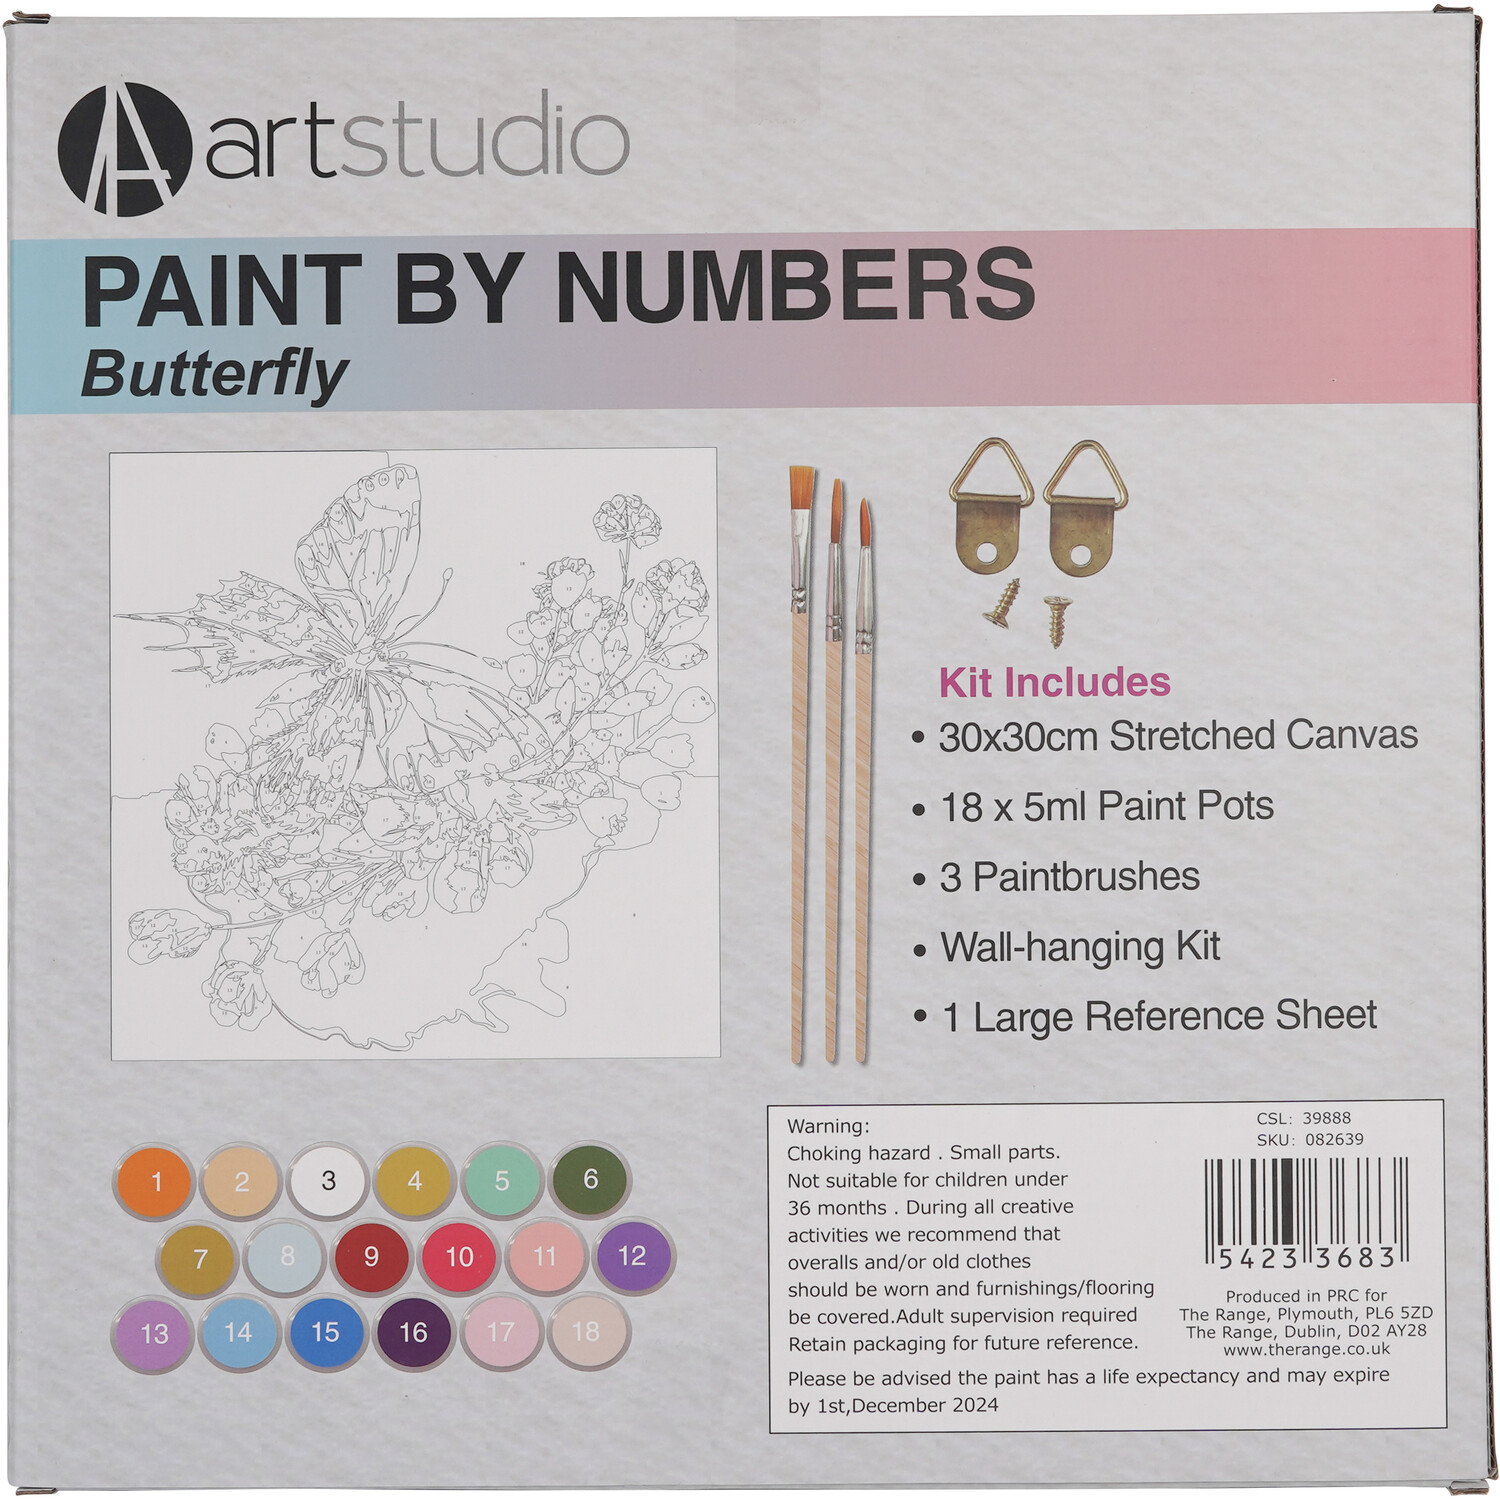 Art Studio Paint by Numbers - Butterfly Image 3